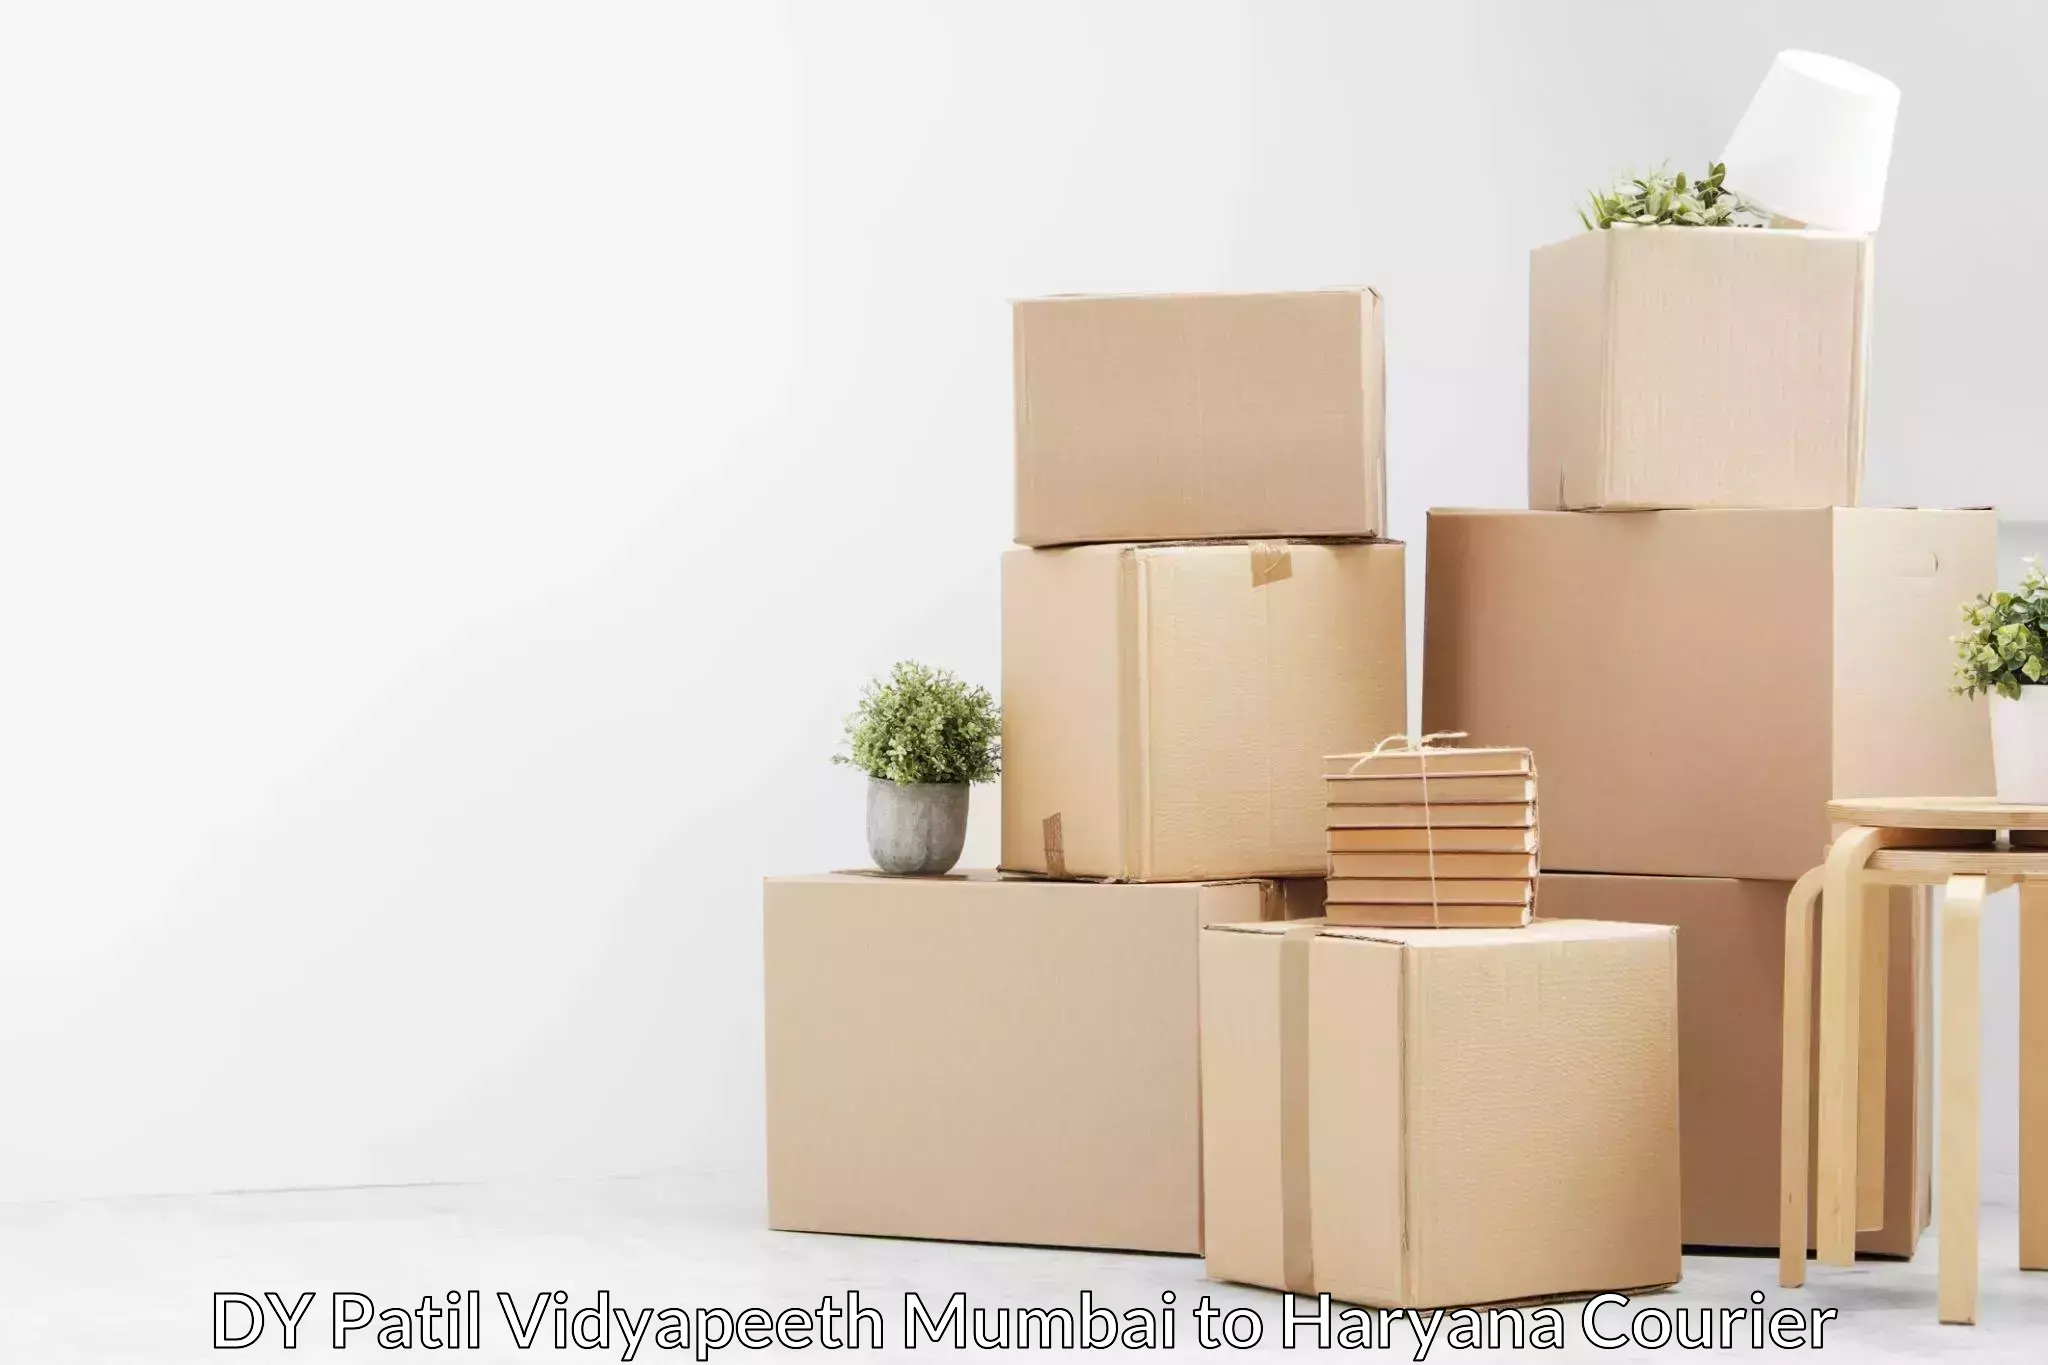 Residential moving experts DY Patil Vidyapeeth Mumbai to Agroha